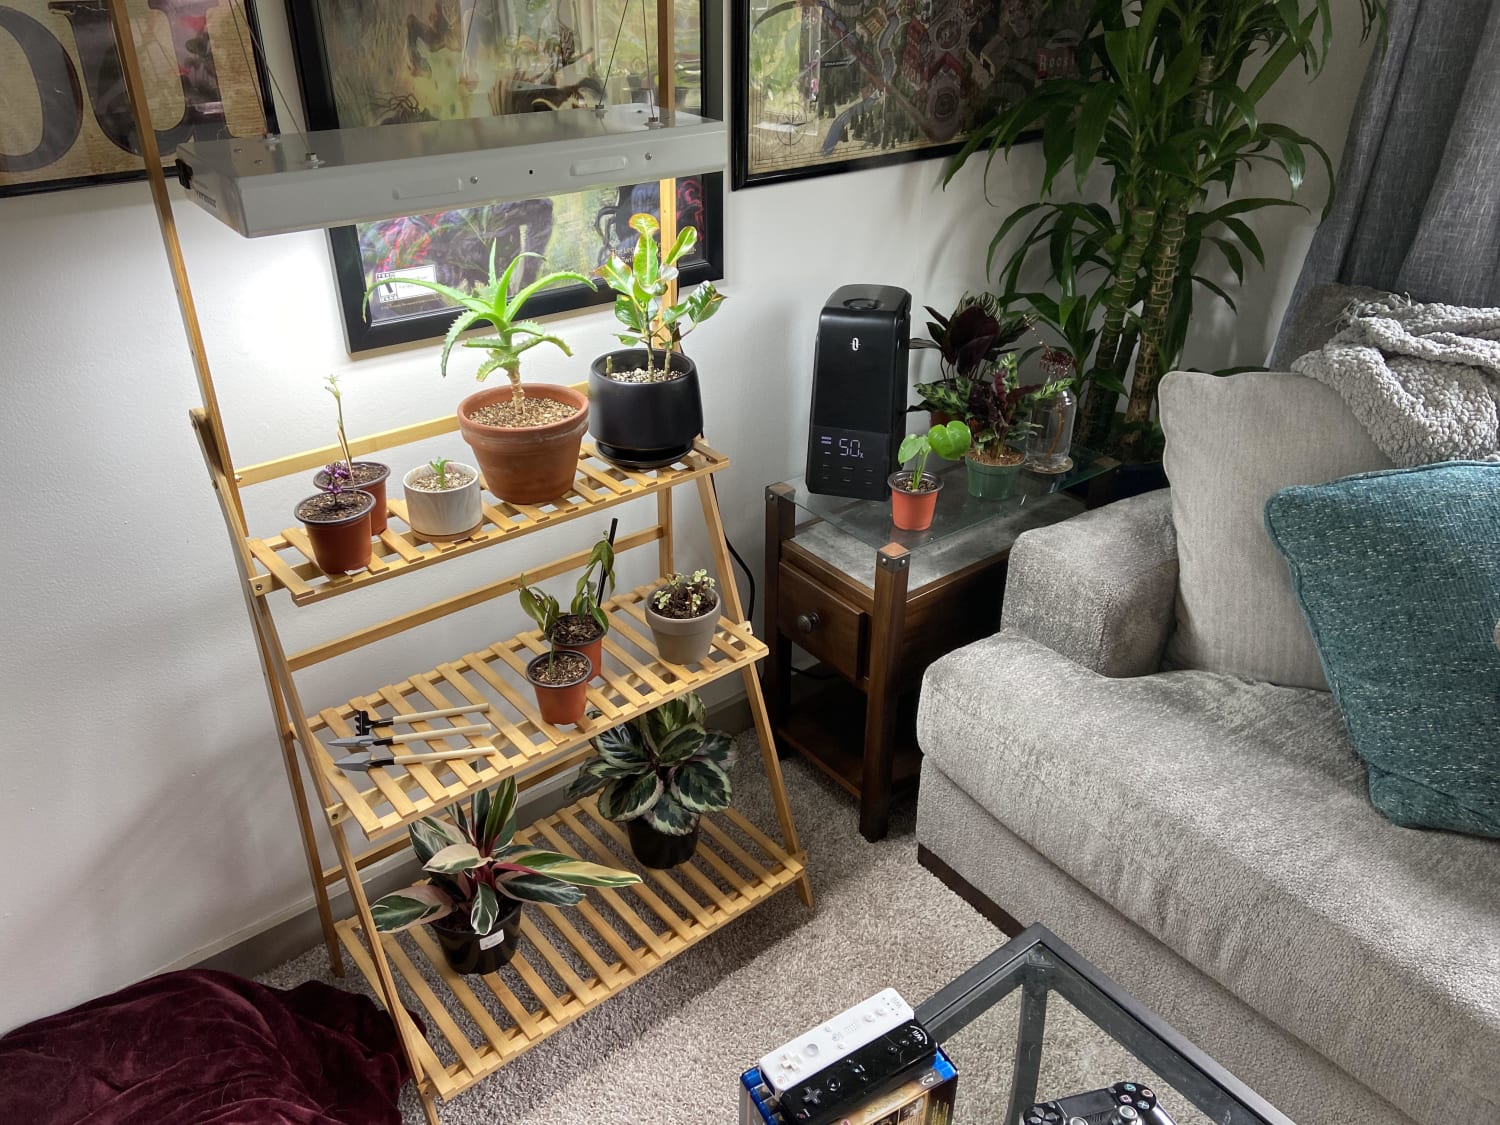 Was told I nearly killed my croton due to too little light so I’ve created my first light shelve in its honor